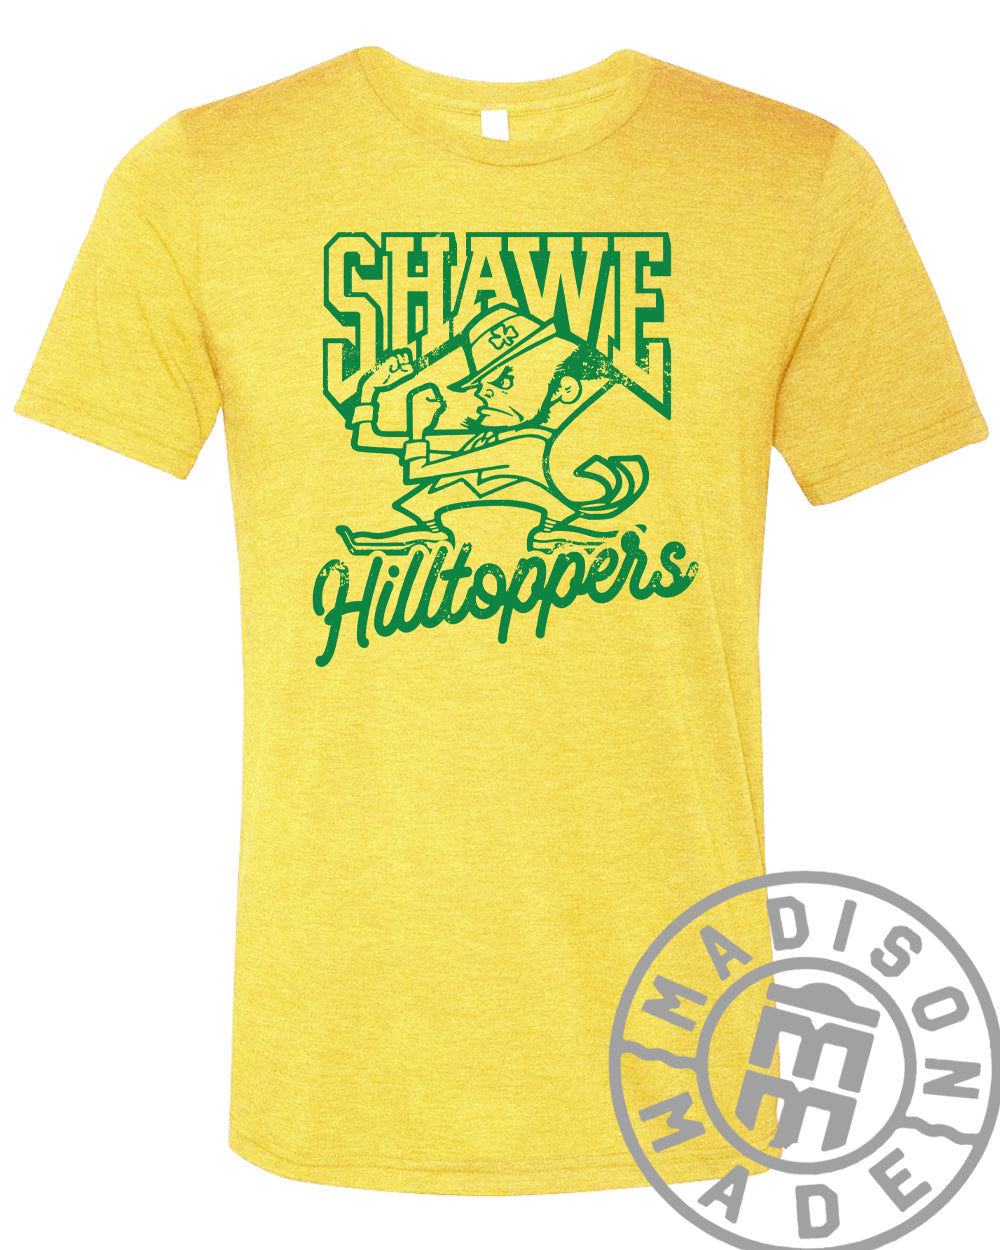 Shawe Hilltoppers Yellow Tee